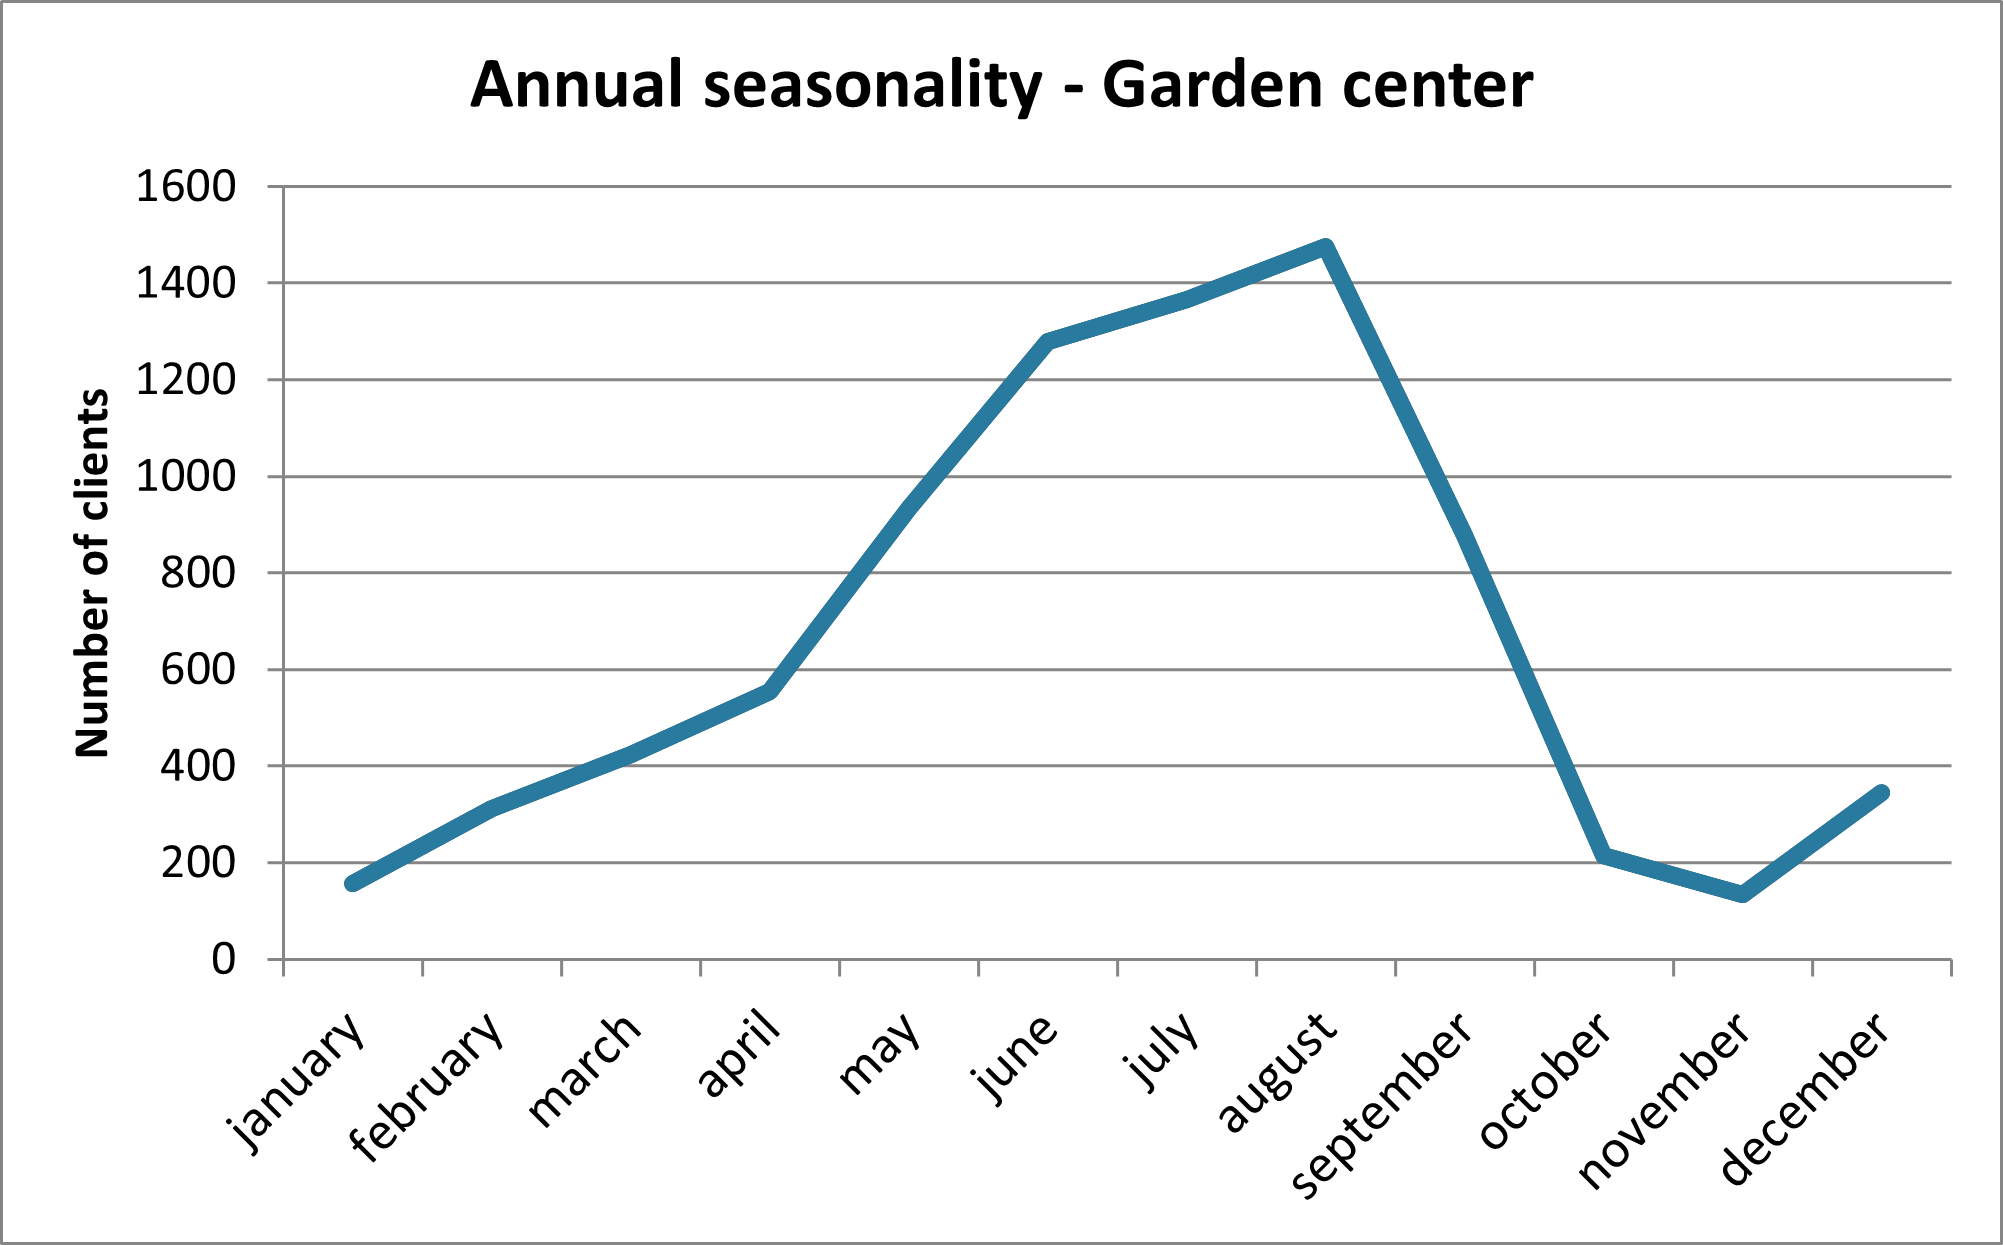 Line graph showing the annual seasonality. The pace (number of clients) varies from 200 per month between October and February, to over 100 between June and August.